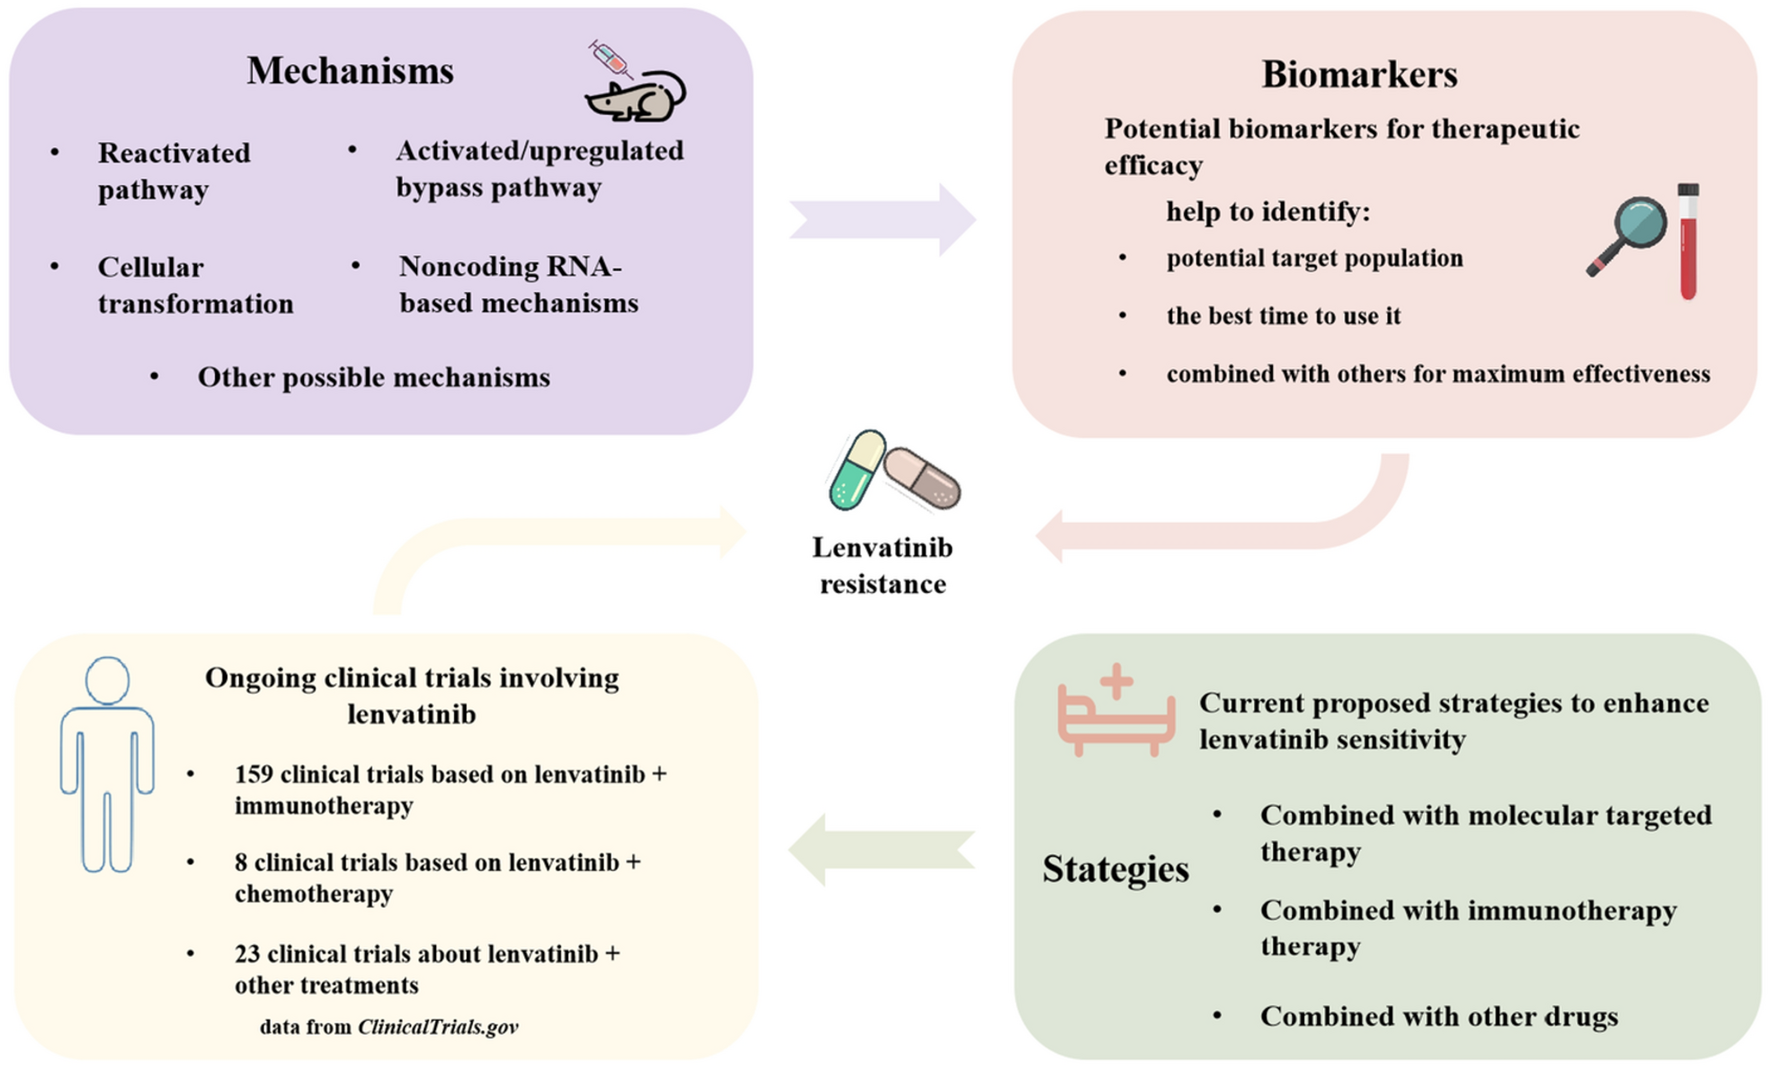 Insights into lenvatinib resistance: mechanisms, potential biomarkers, and strategies to enhance sensitivity